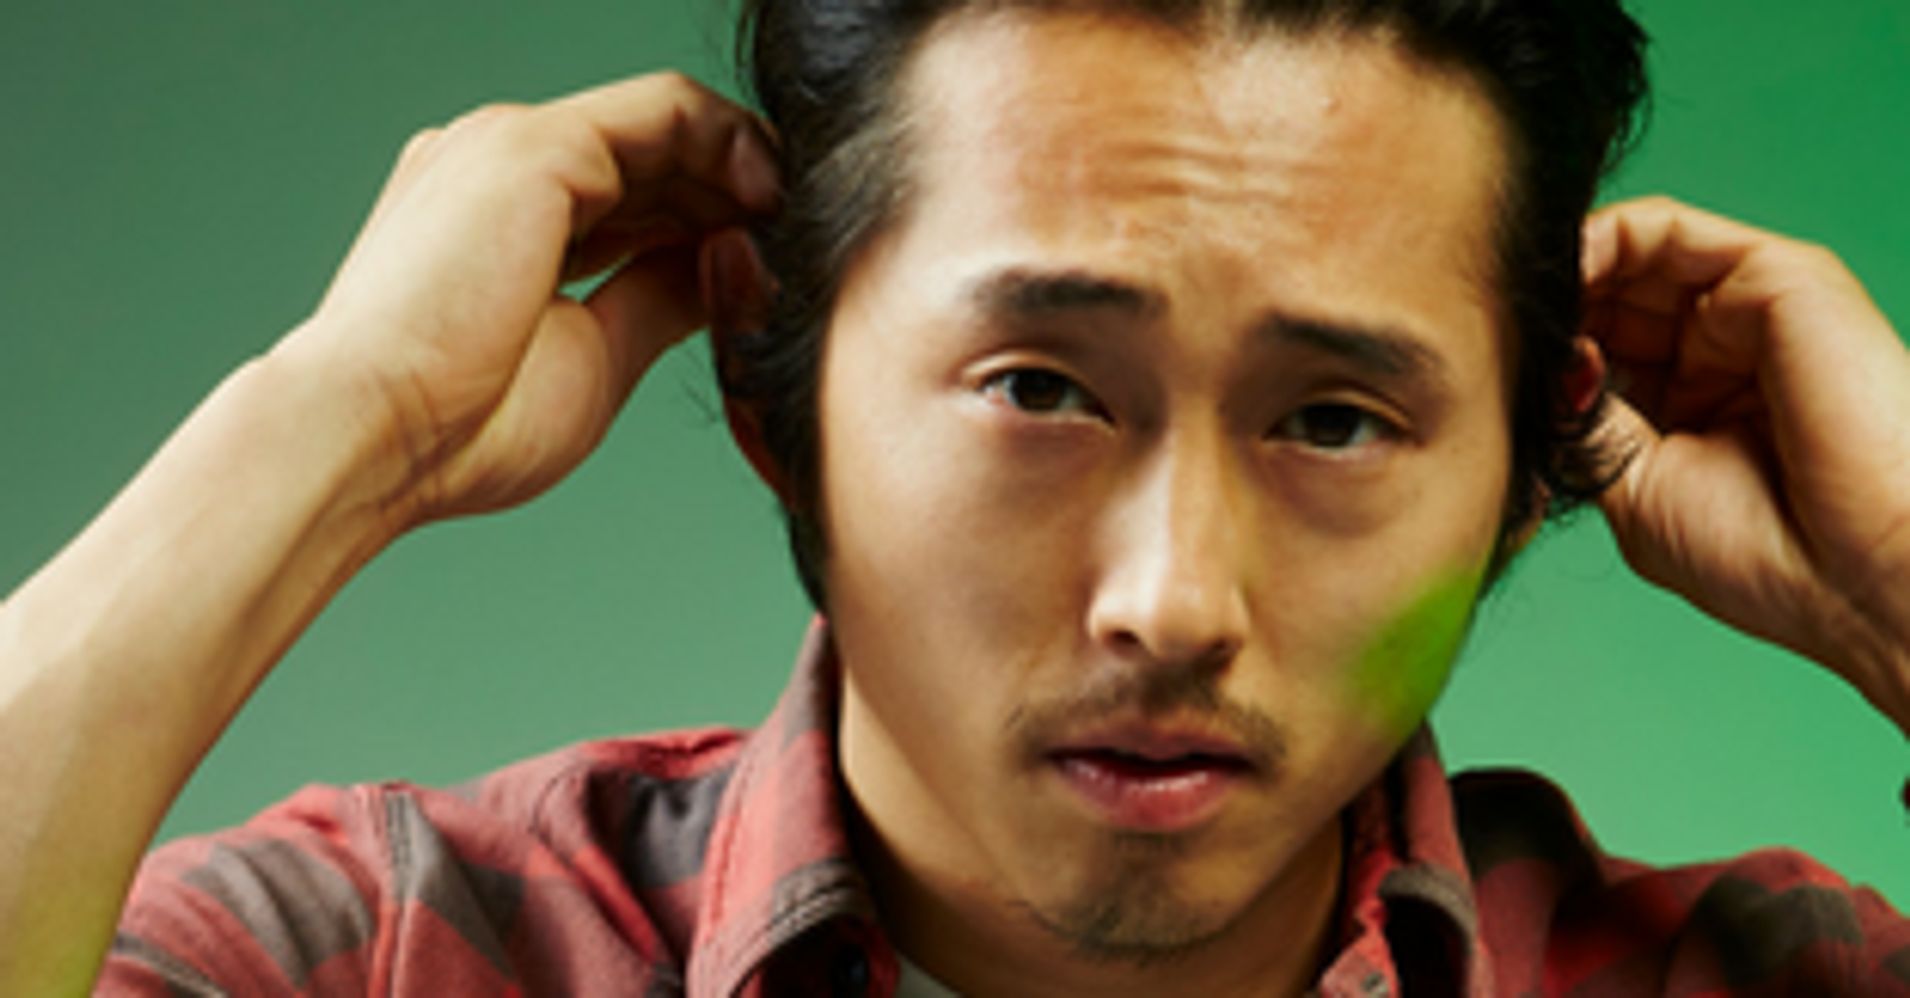 21 Fine-As-Hell Asian Men Who Will Make You Swoon And Then Some | HuffPost